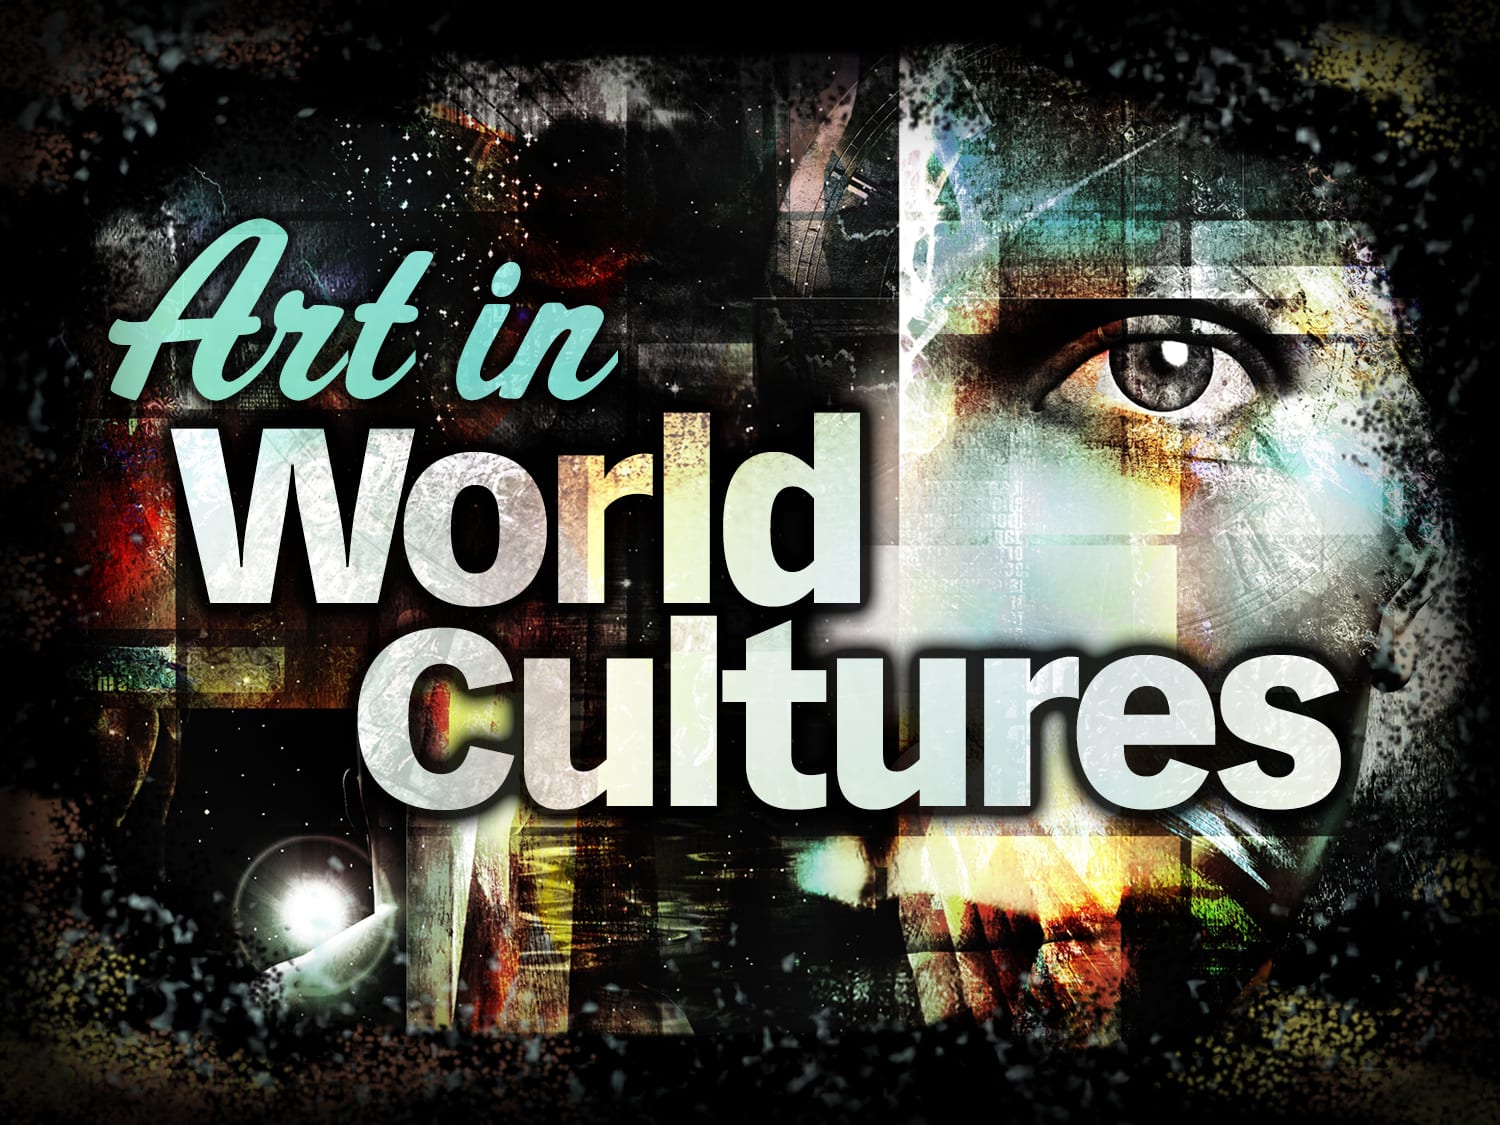 Art in World Cultures